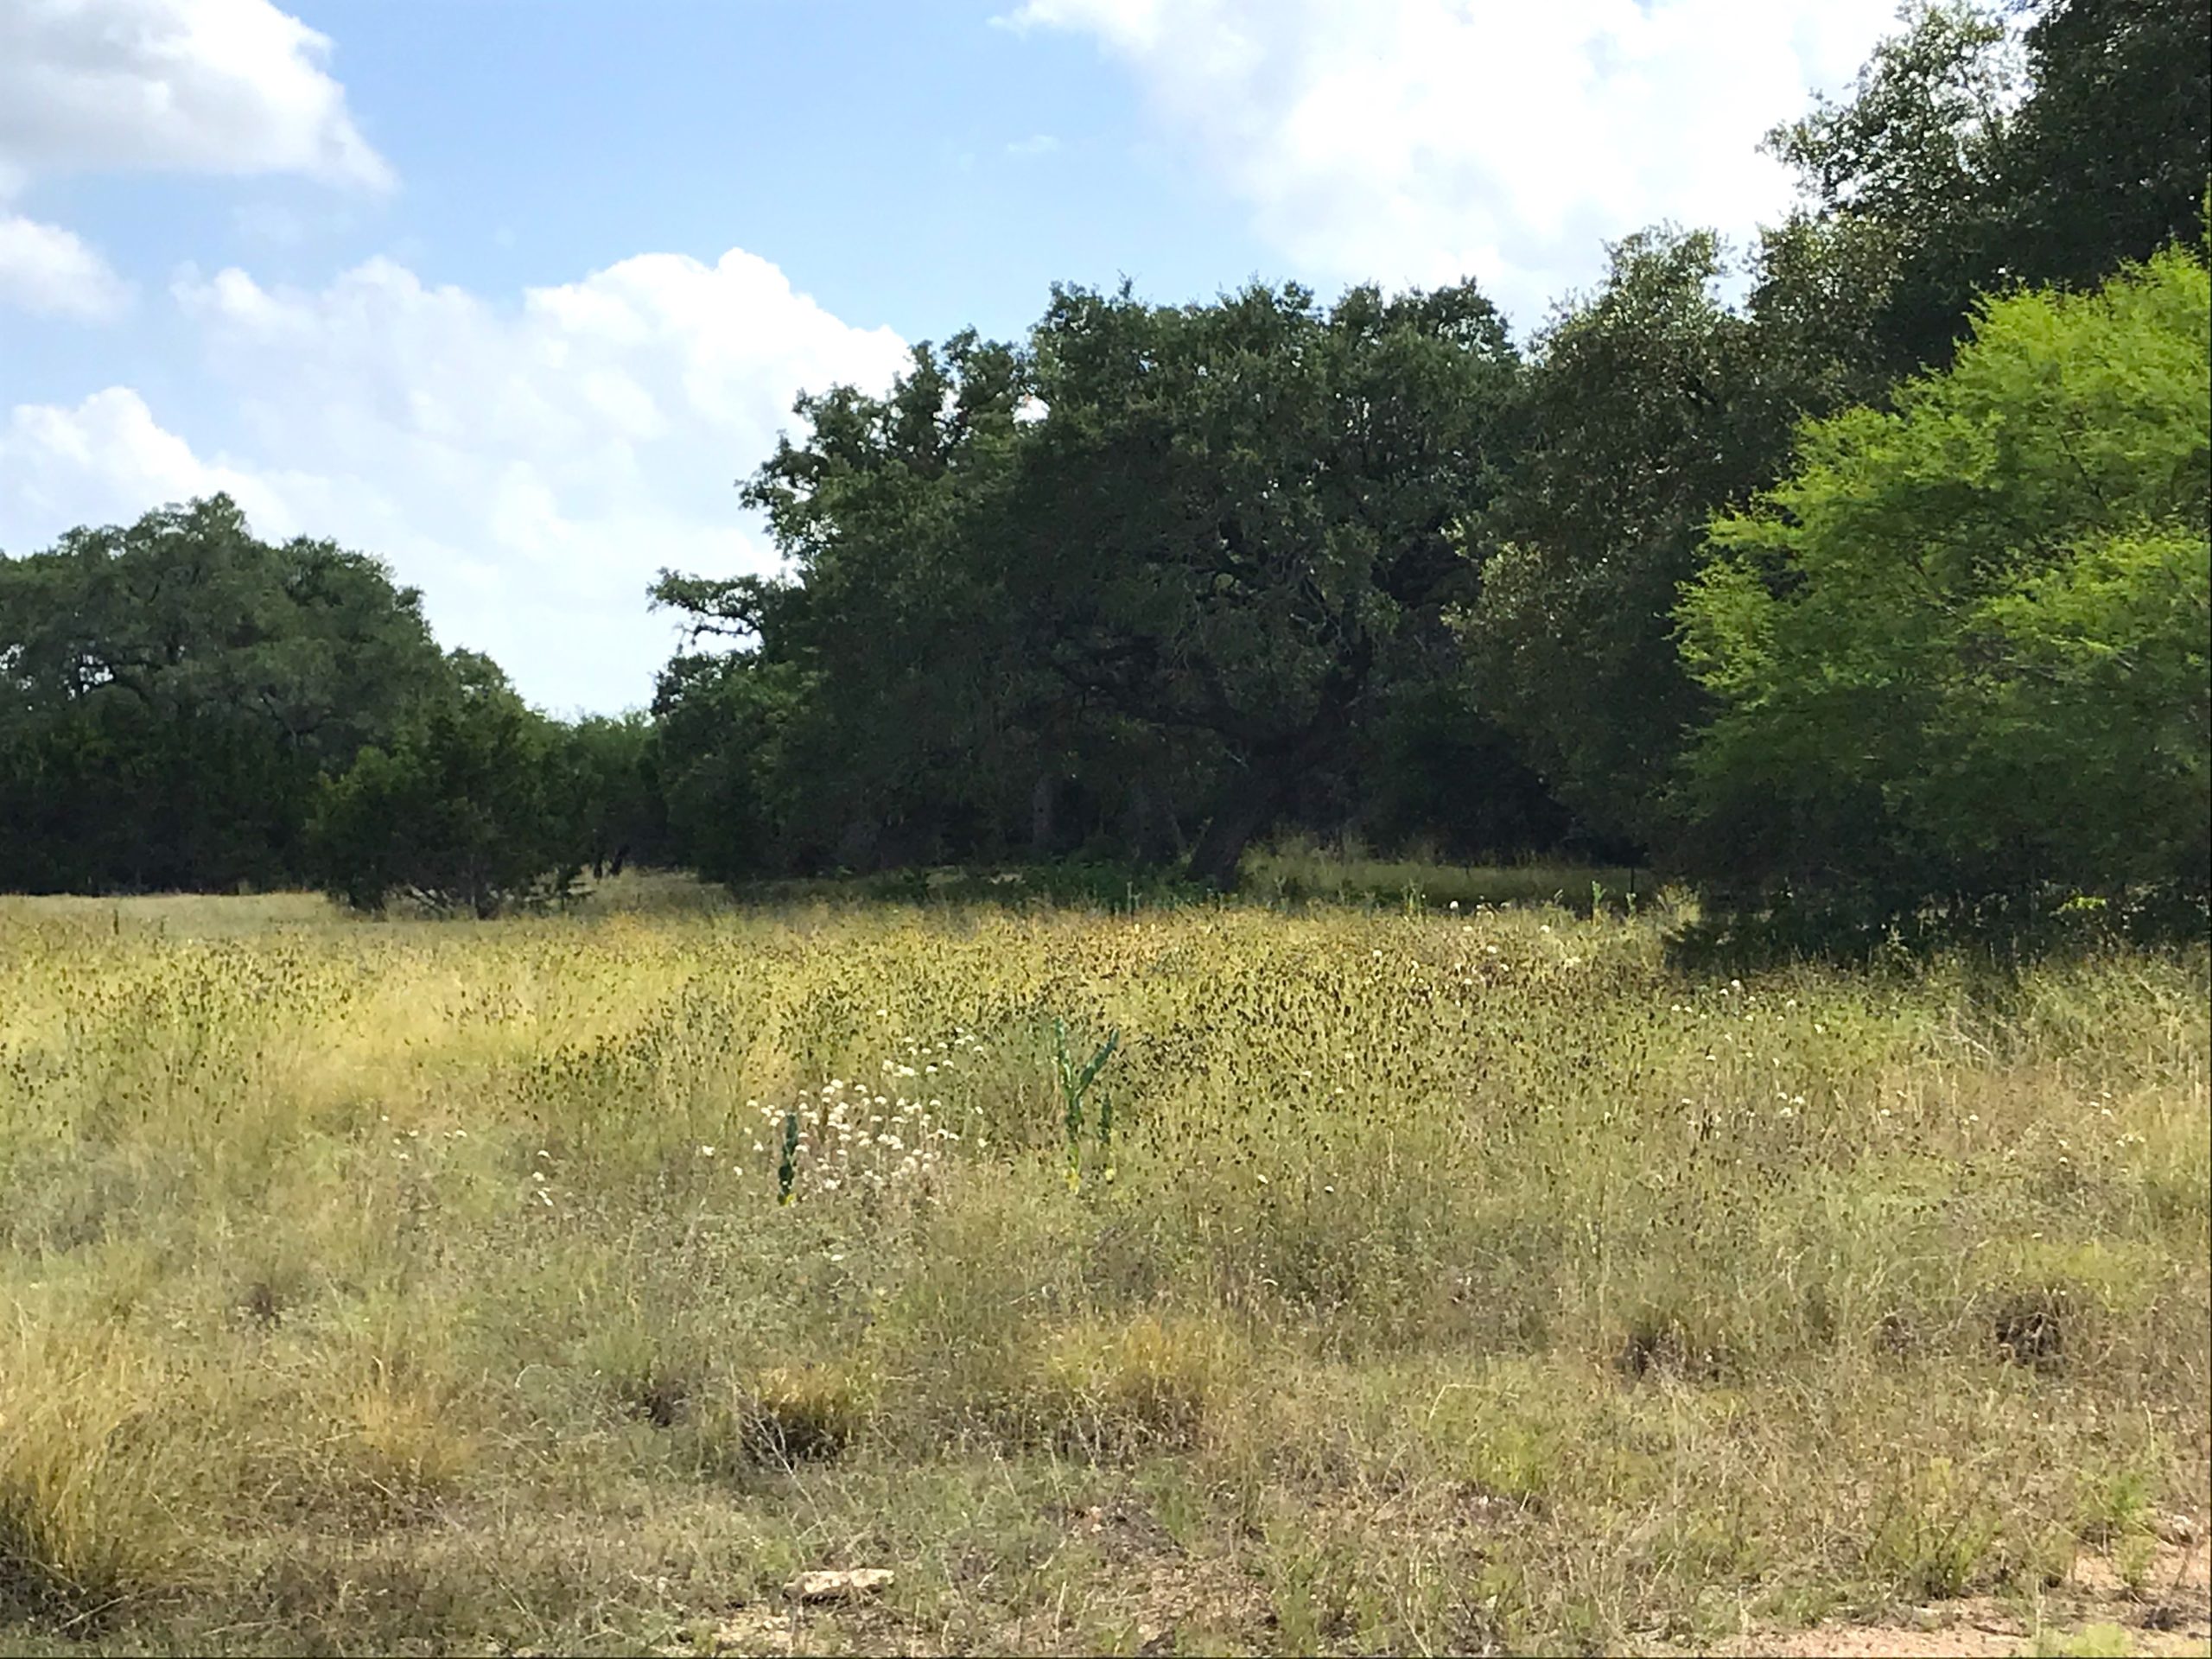 Lot 4 in the Springs of Cordillera Ranch